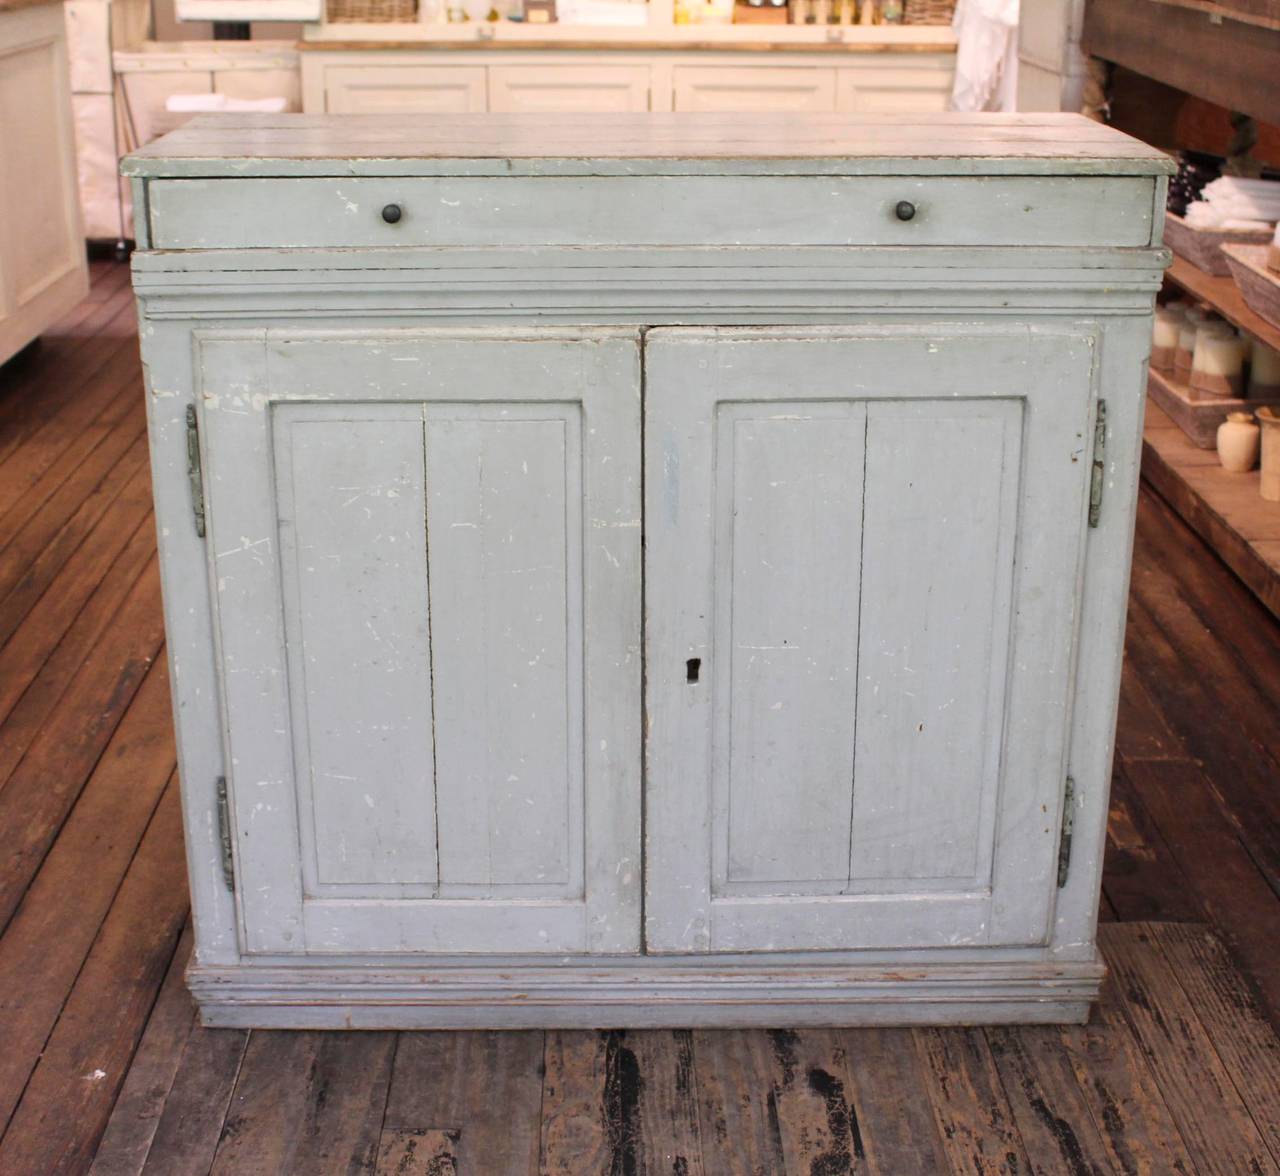 Double Door Sideboard, 19th c Sweden, in Grey Blue Paint.  Single Drawer Atop Double Door Concealing Single Shelf on Left Side and Two Shelves on Right Side.  Finished Painted and Paneled Back Allows Sideboard to Float in a Room.